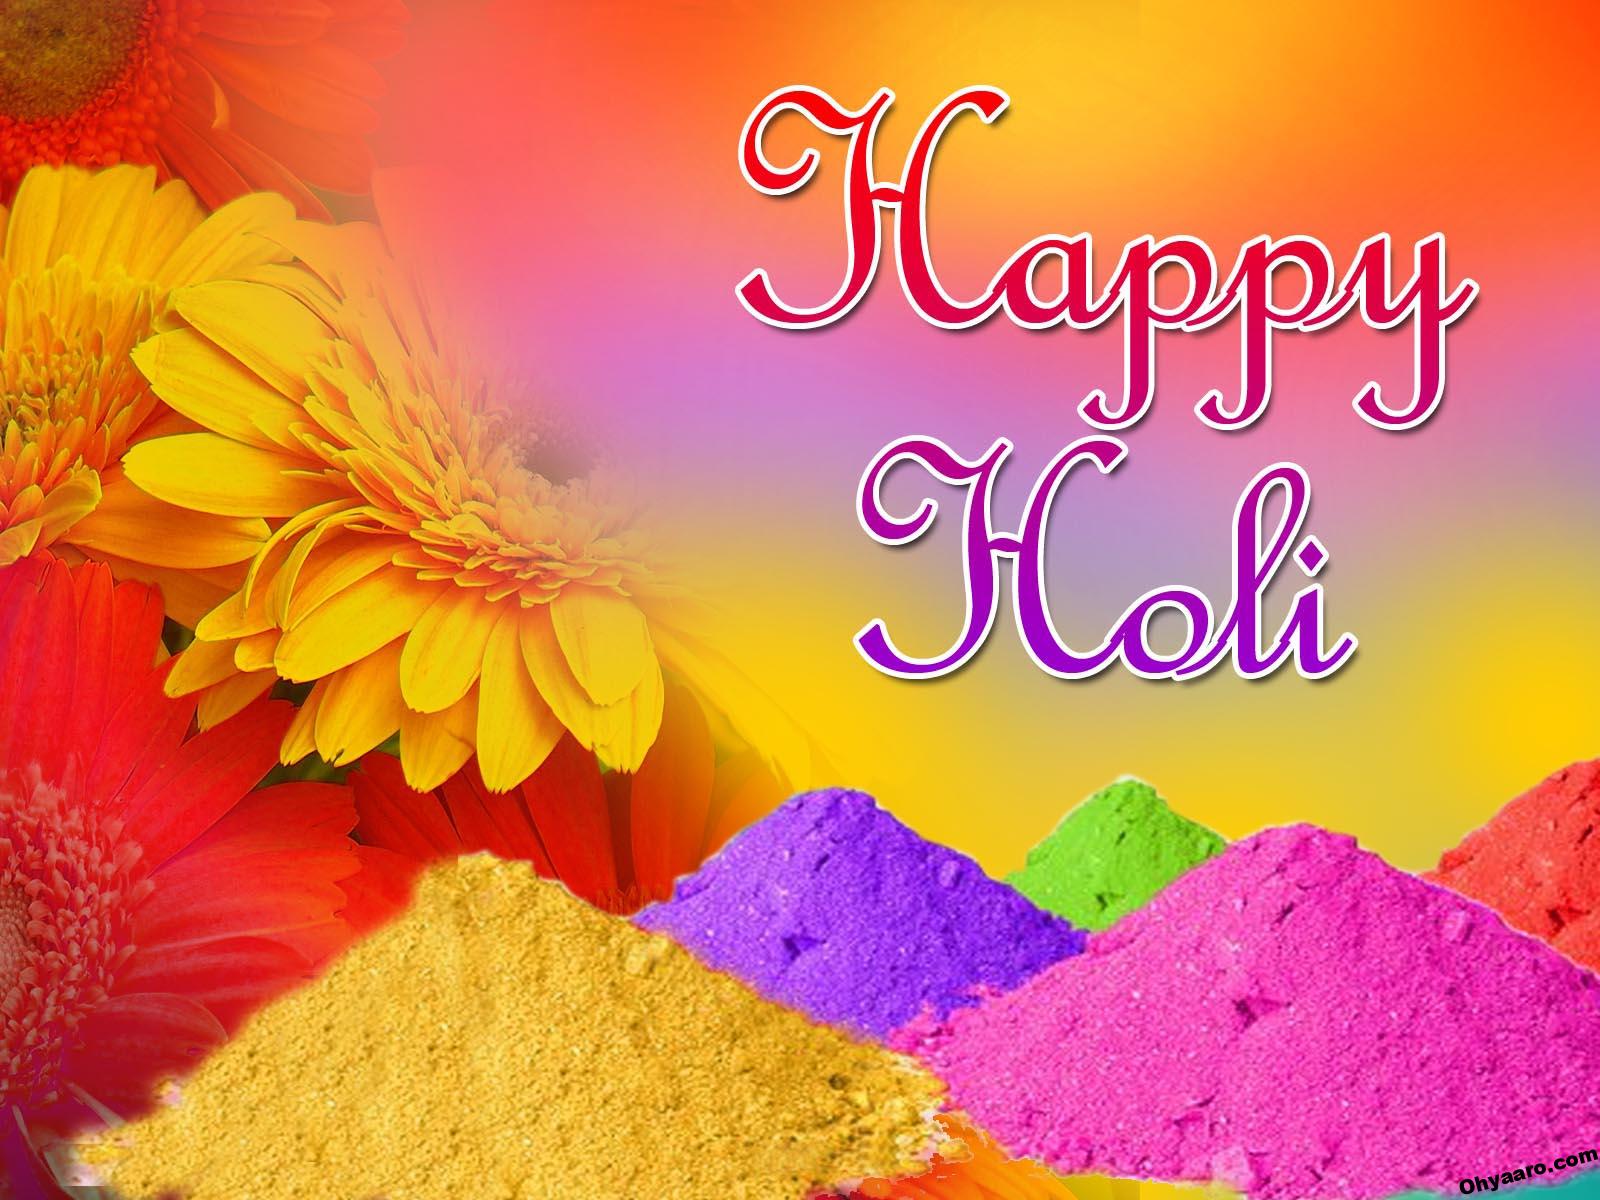 Happy Holi Wishes Images - Holi Wishes Wallpaper Download - Oh Yaaro